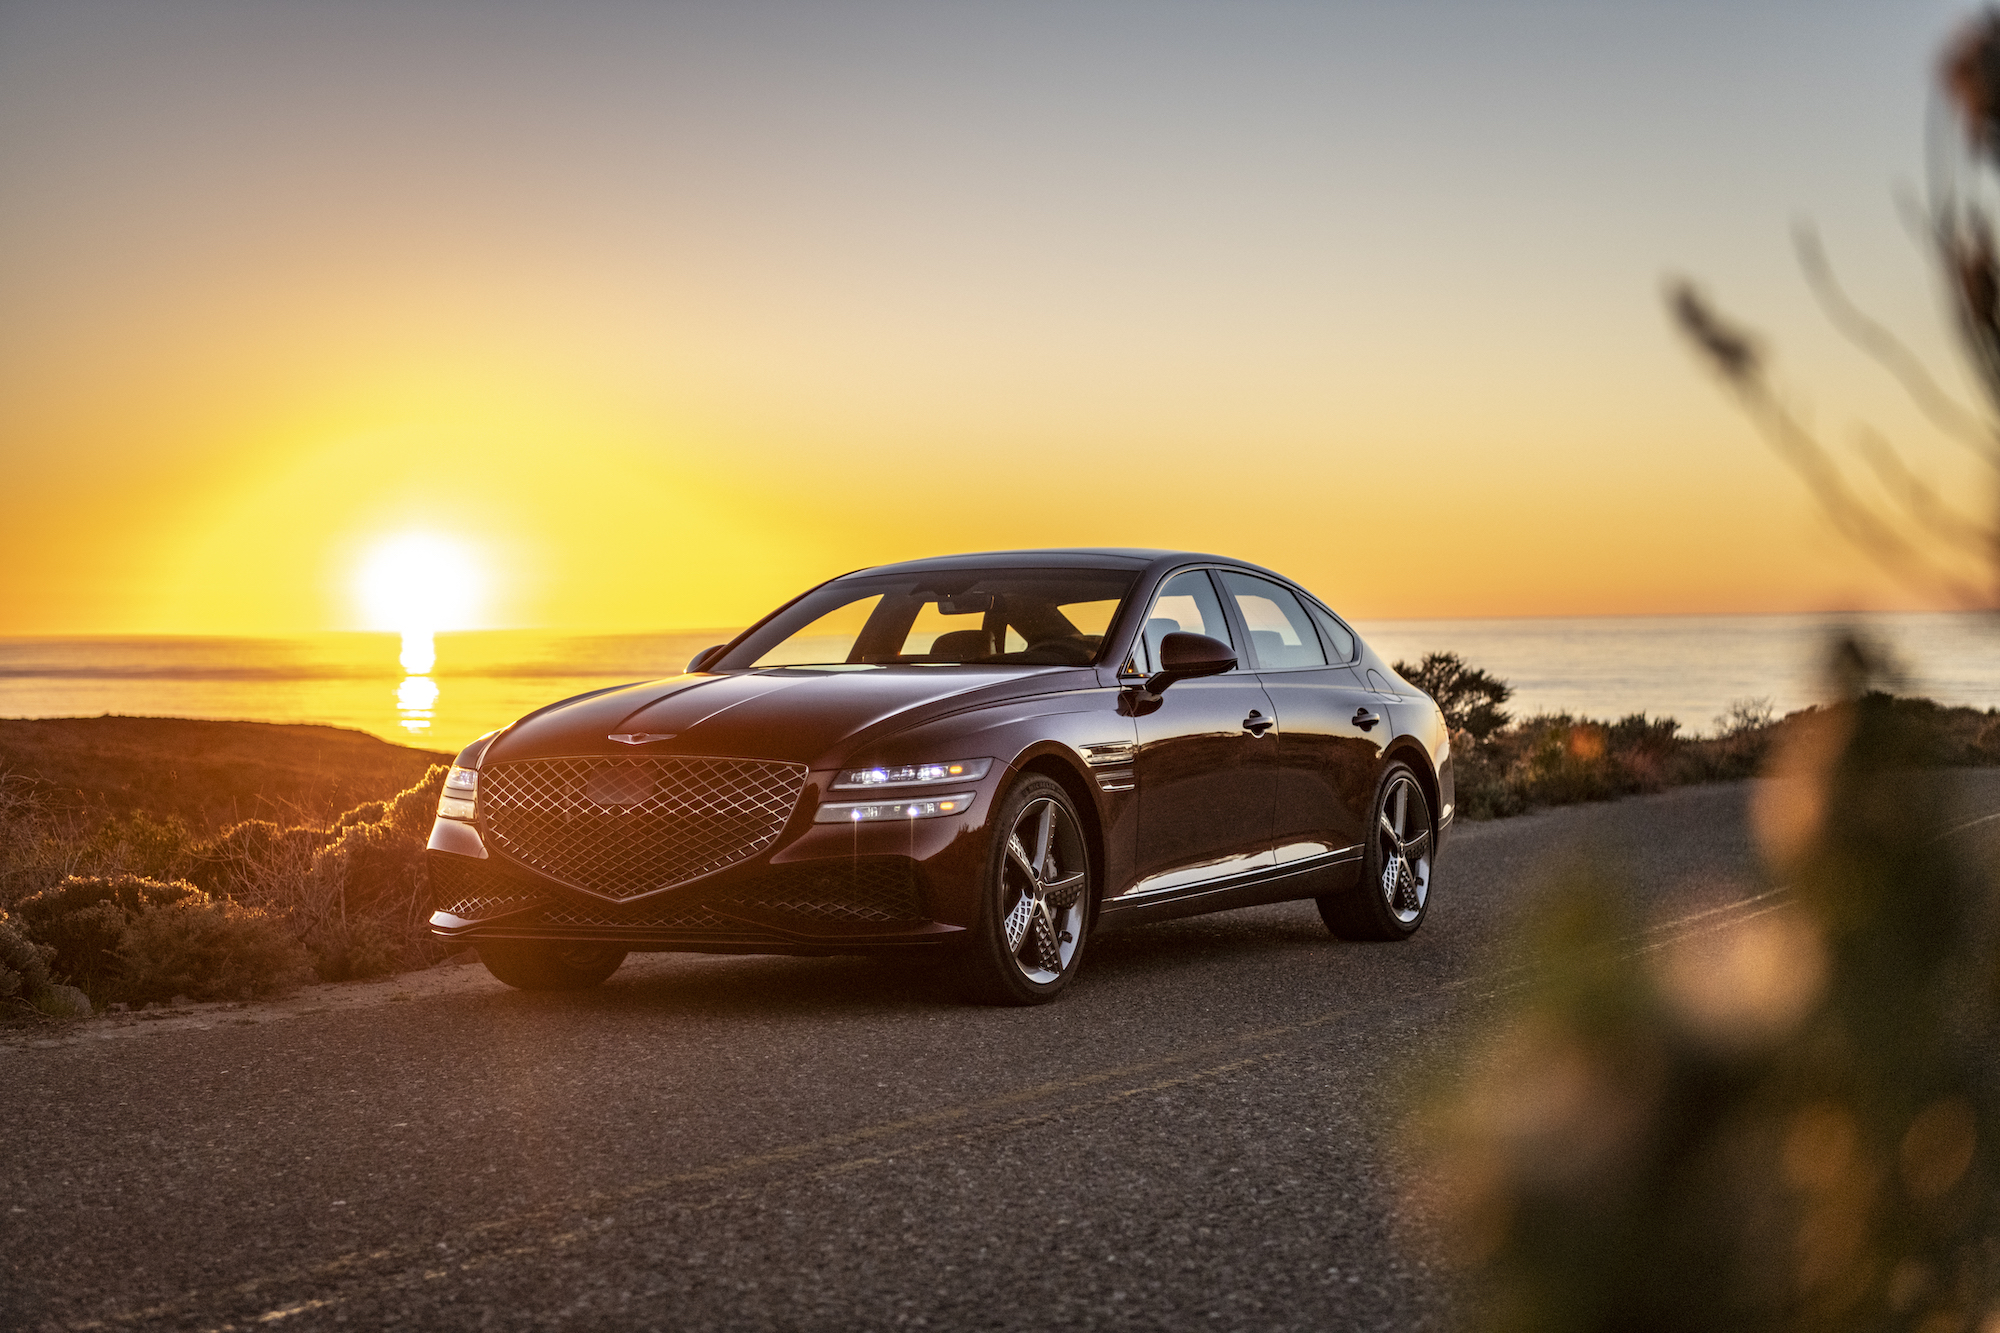 A 2022 Genesis G80 luxury sedan parked on the side of the road as the sun sets behind it